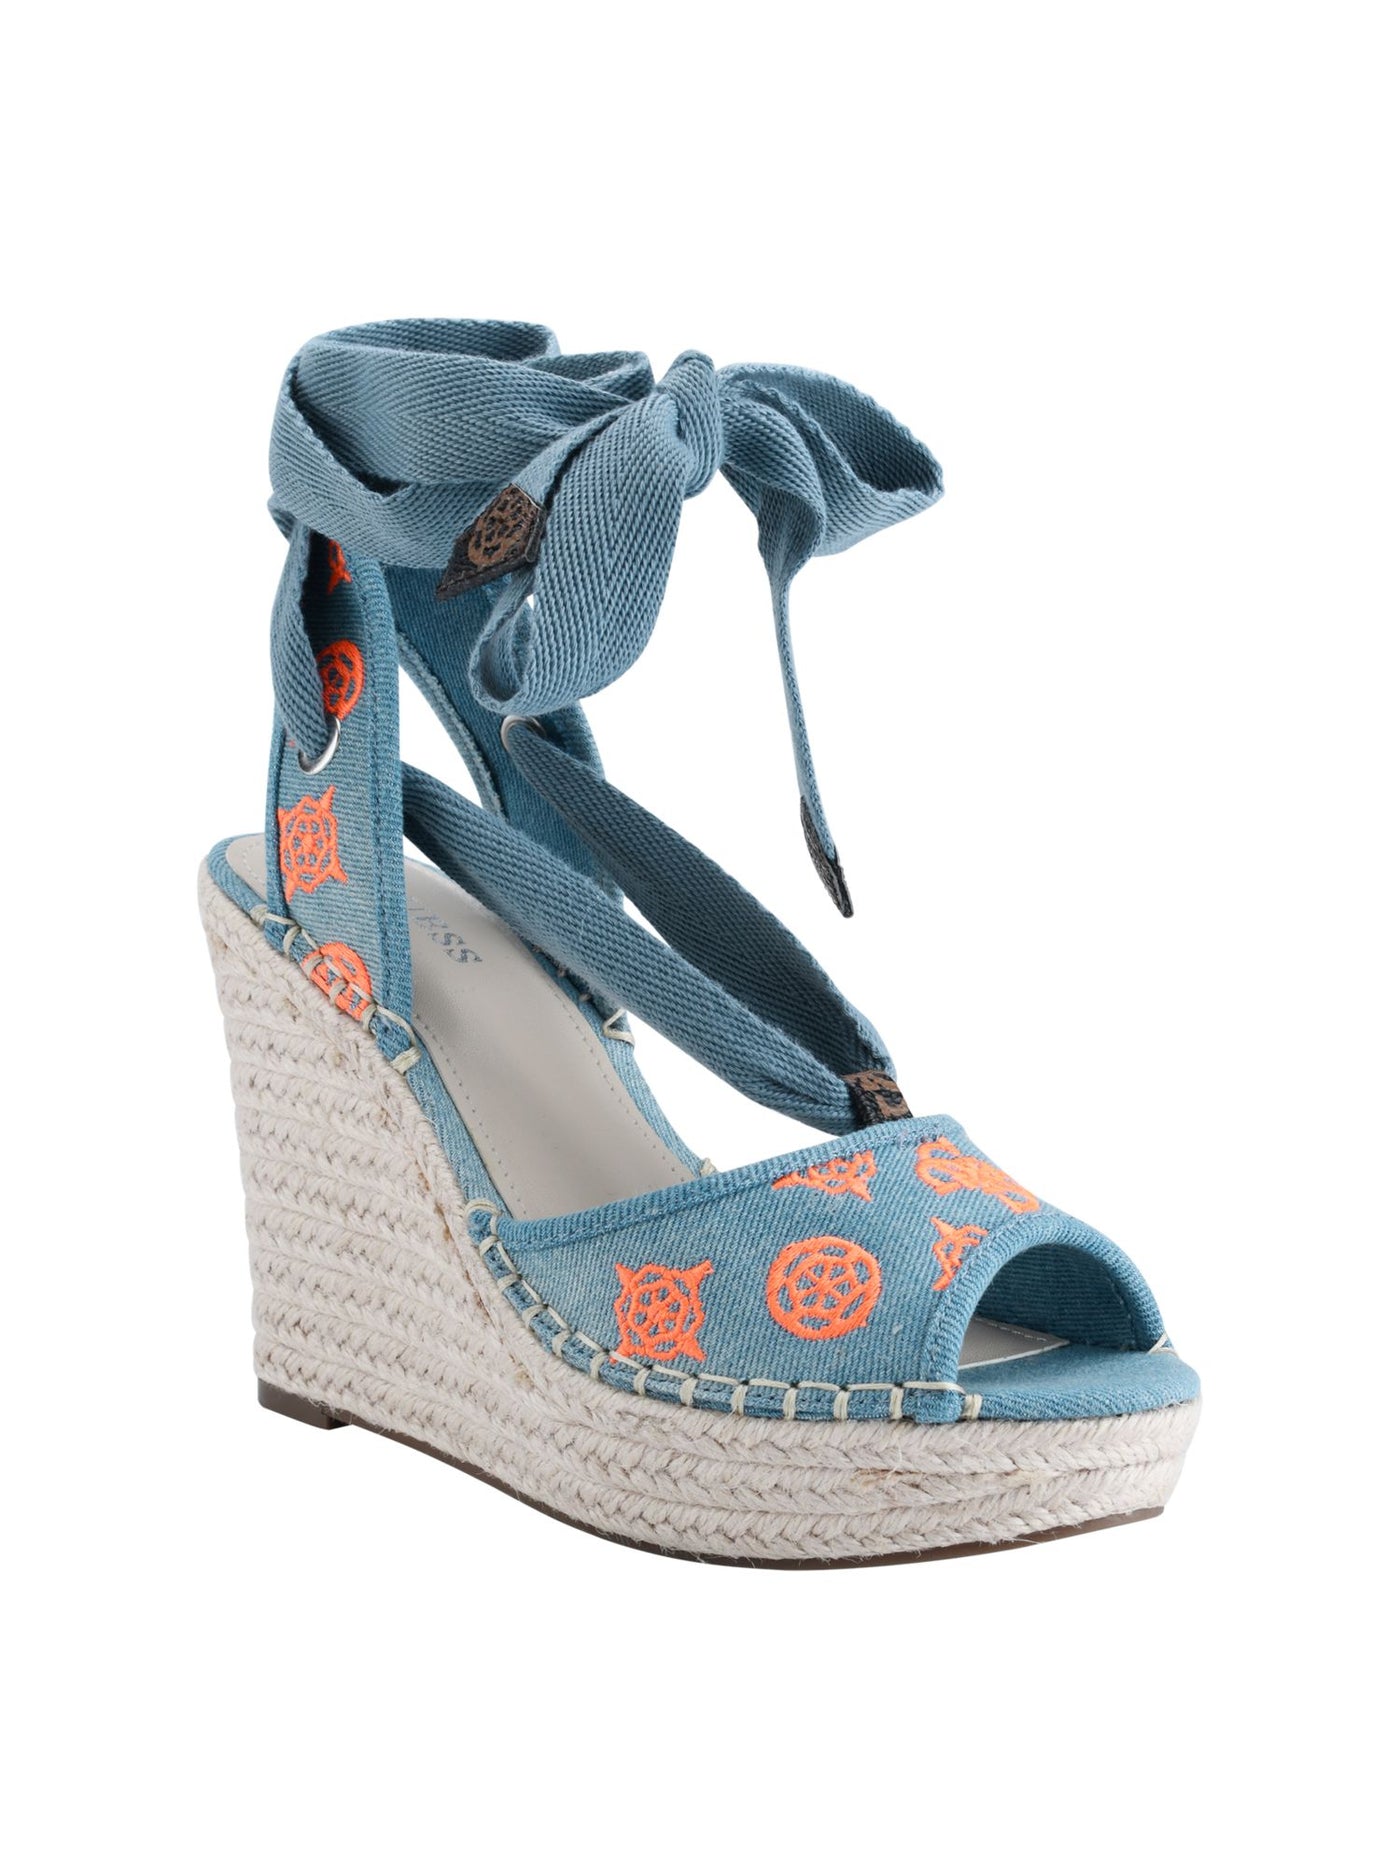 GUESS Womens Blue Patterned 1-1/2" Platform Ankle Wrap Padded Halona Peep Toe Wedge Lace-Up Espadrille Shoes 8.5 M